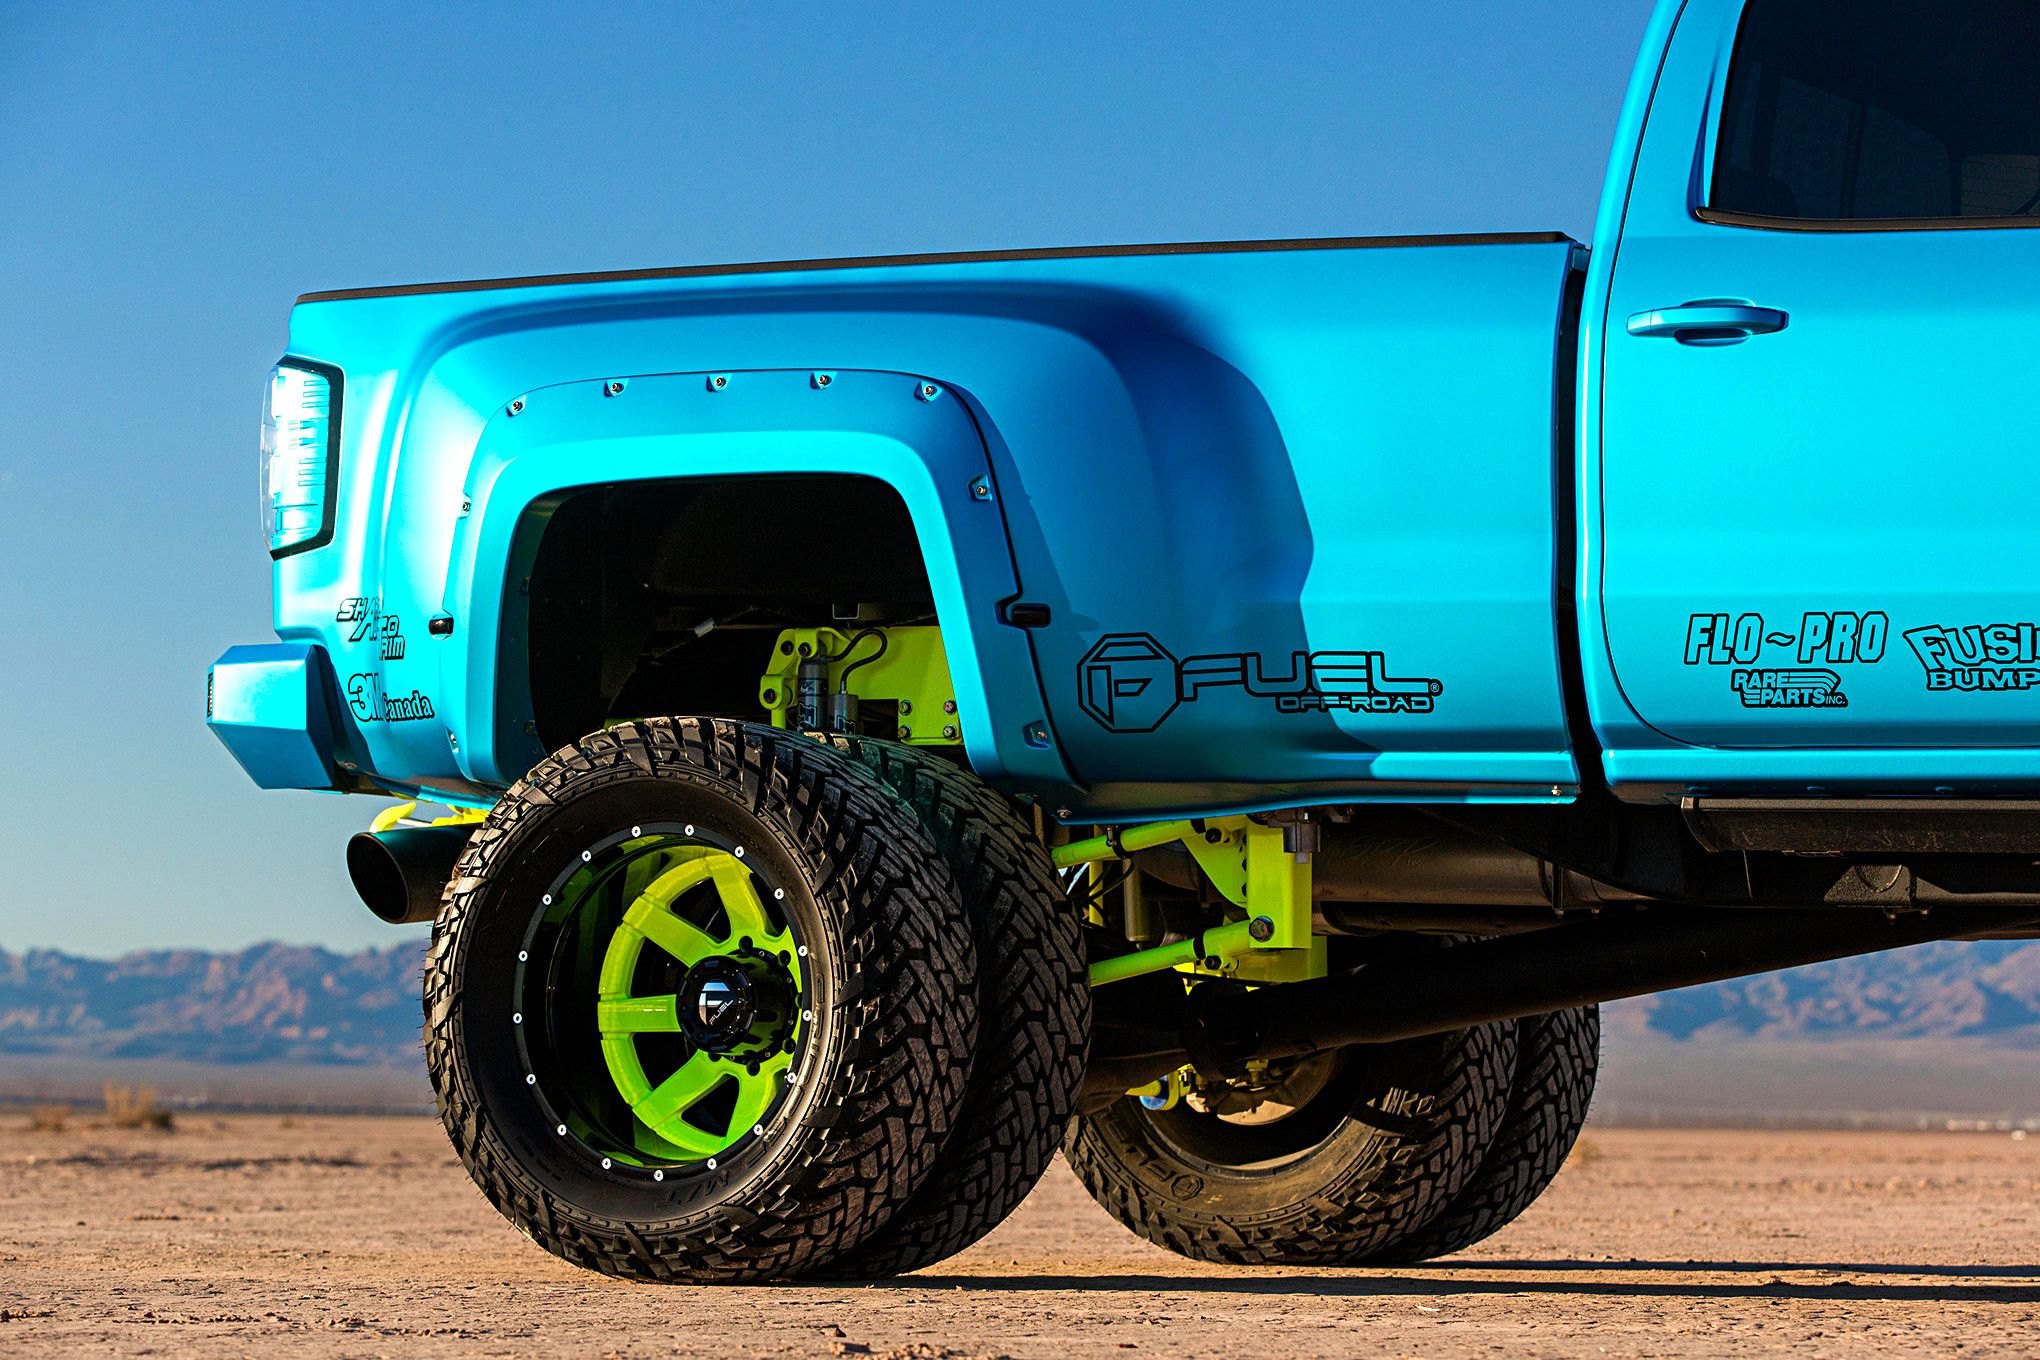 Fuel Maveric custom painted dually wheels for Duramax - Photo by Cody Gephart (Trucktrend)